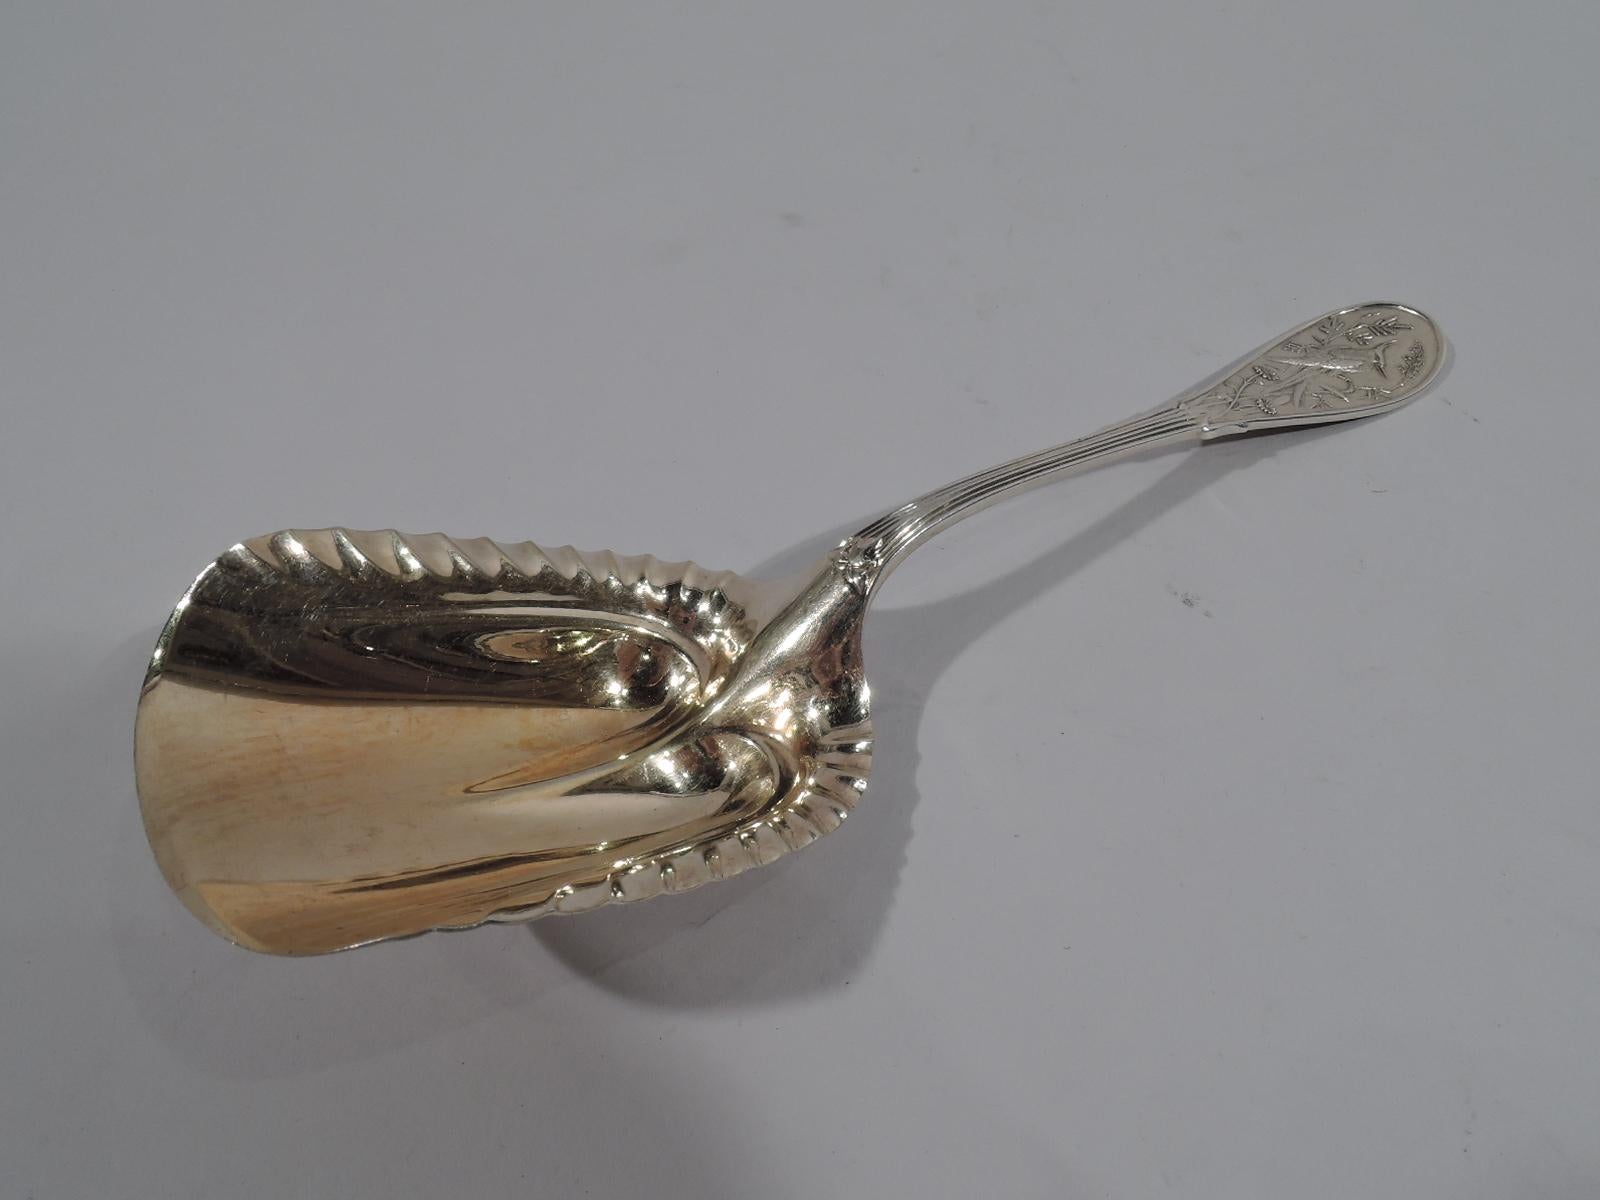 Aesthetic sterling silver berry scoop in Japanese. Made by Tiffany & Co. in New York. Raised handle with oval terminal. Double sided low-relief stylized ornament with perched bird, flowers, and leafing stalks. Gilt-washed lobed and crimped